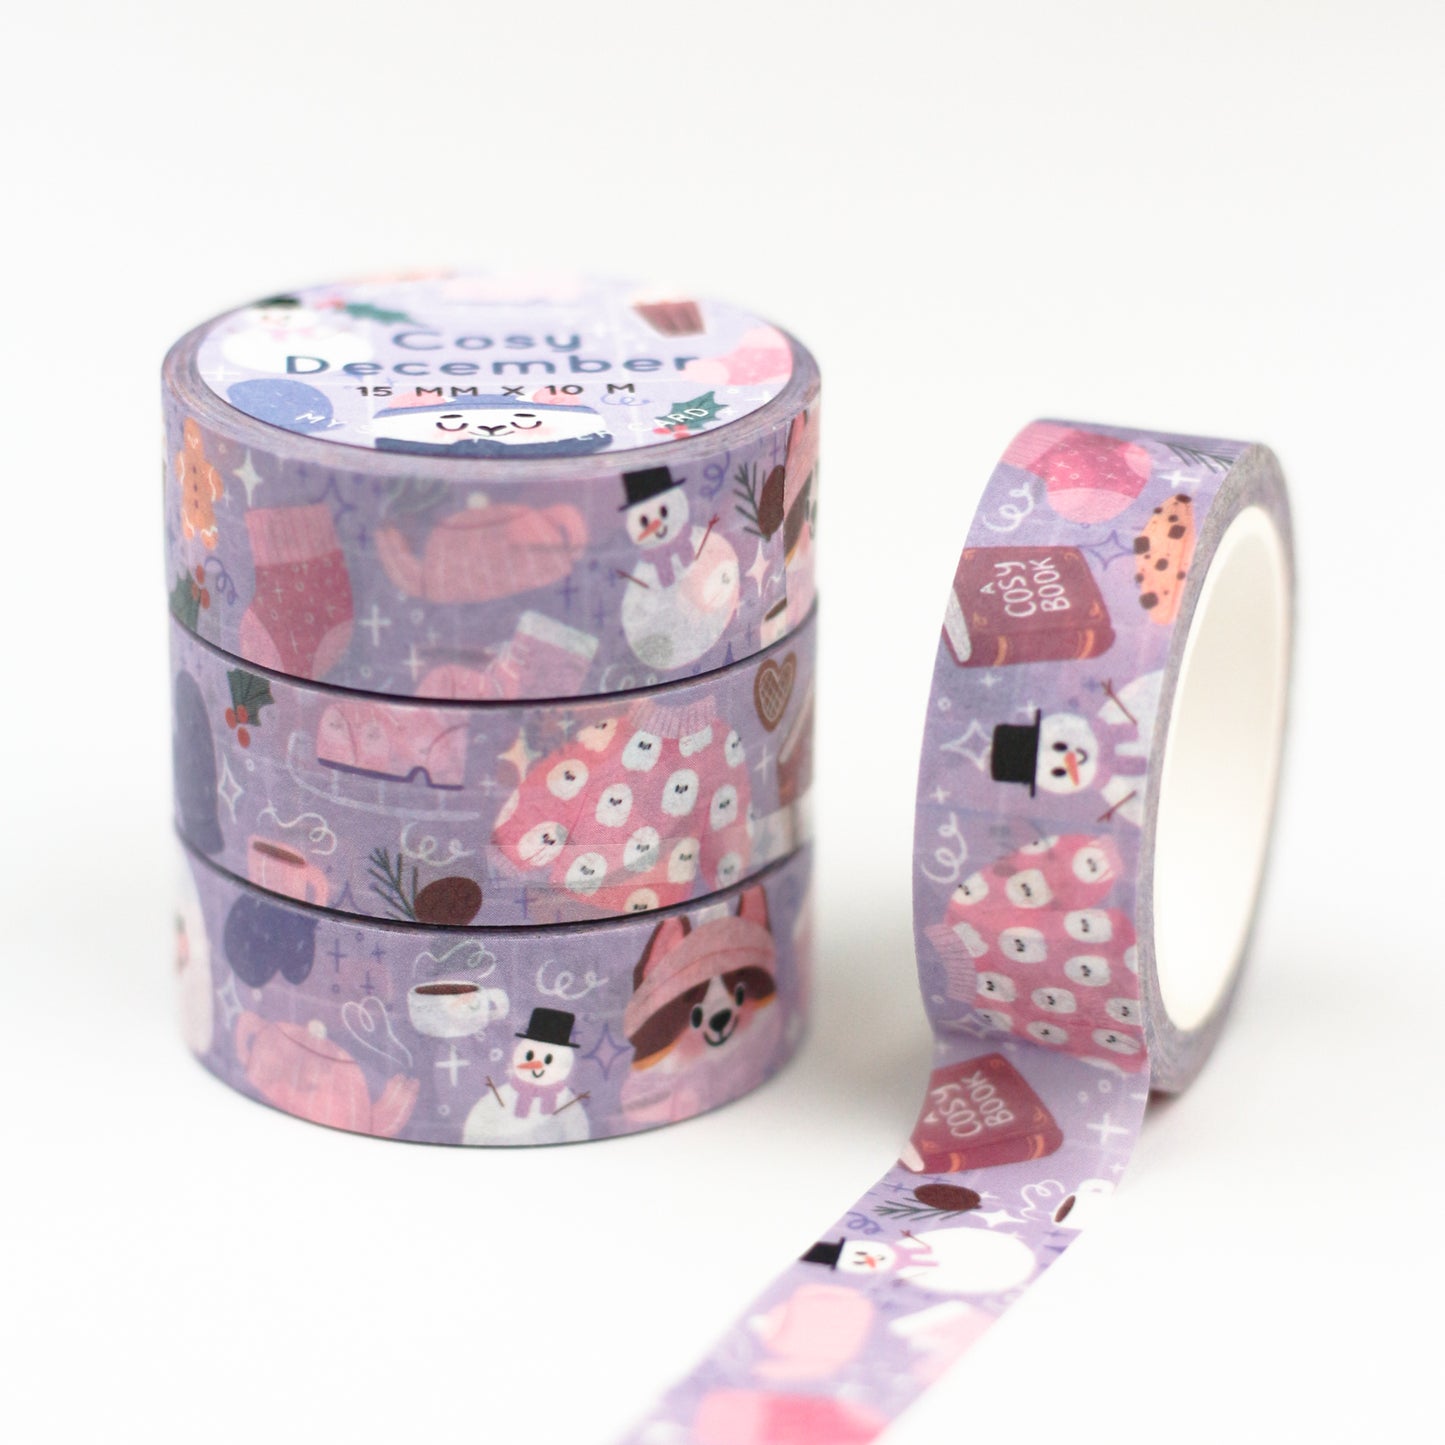 Cosy December - Washi Tape